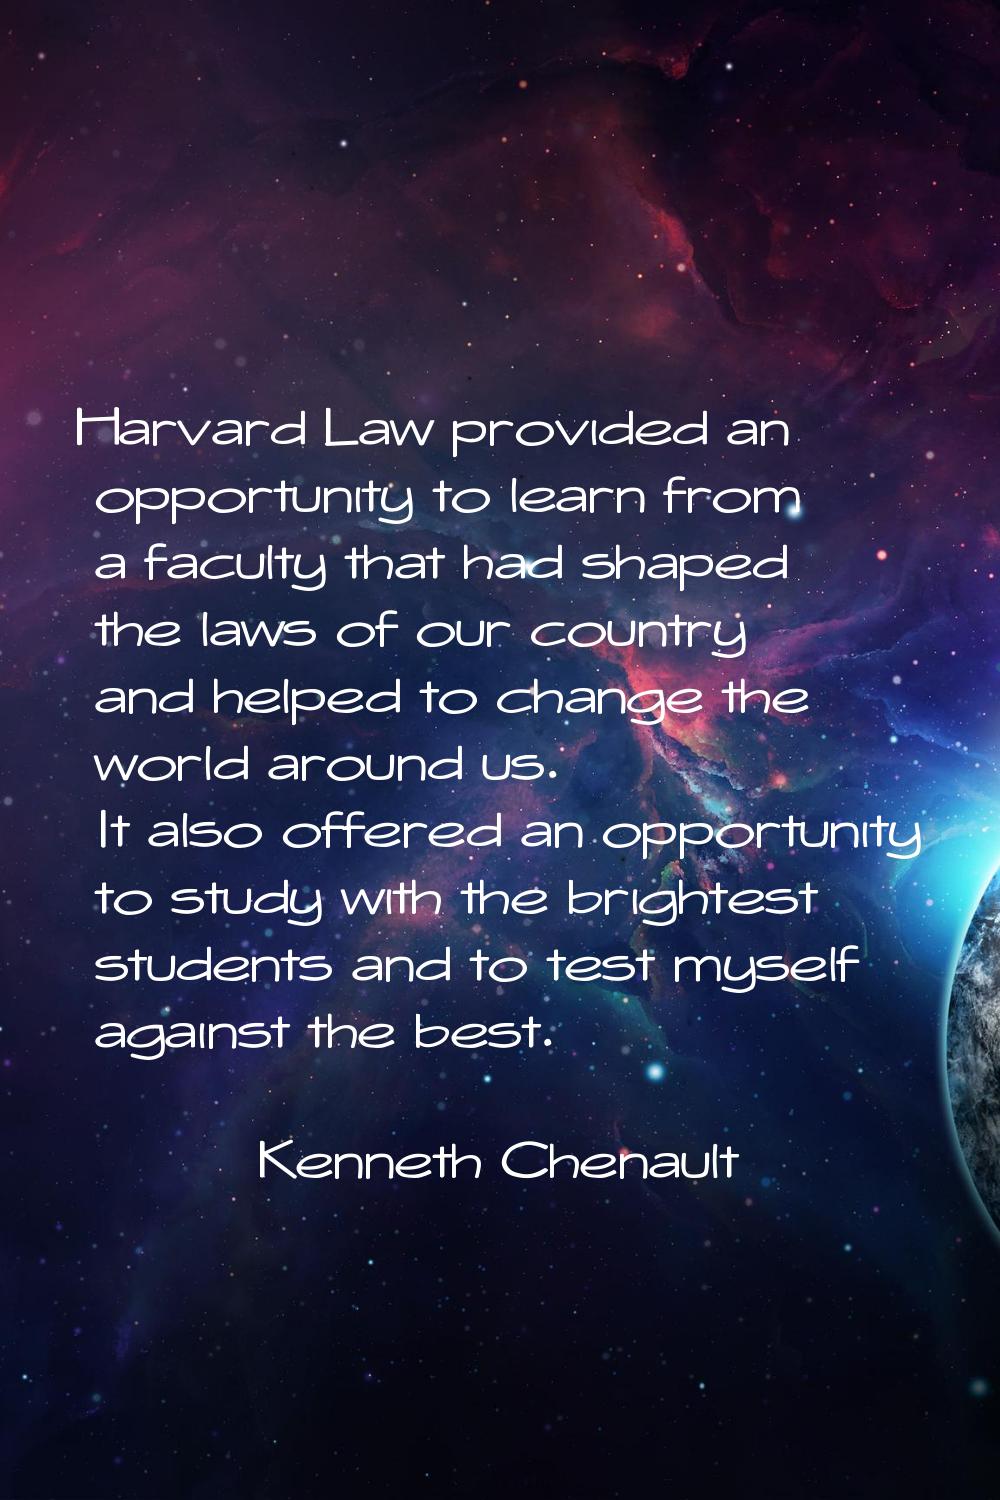 Harvard Law provided an opportunity to learn from a faculty that had shaped the laws of our country